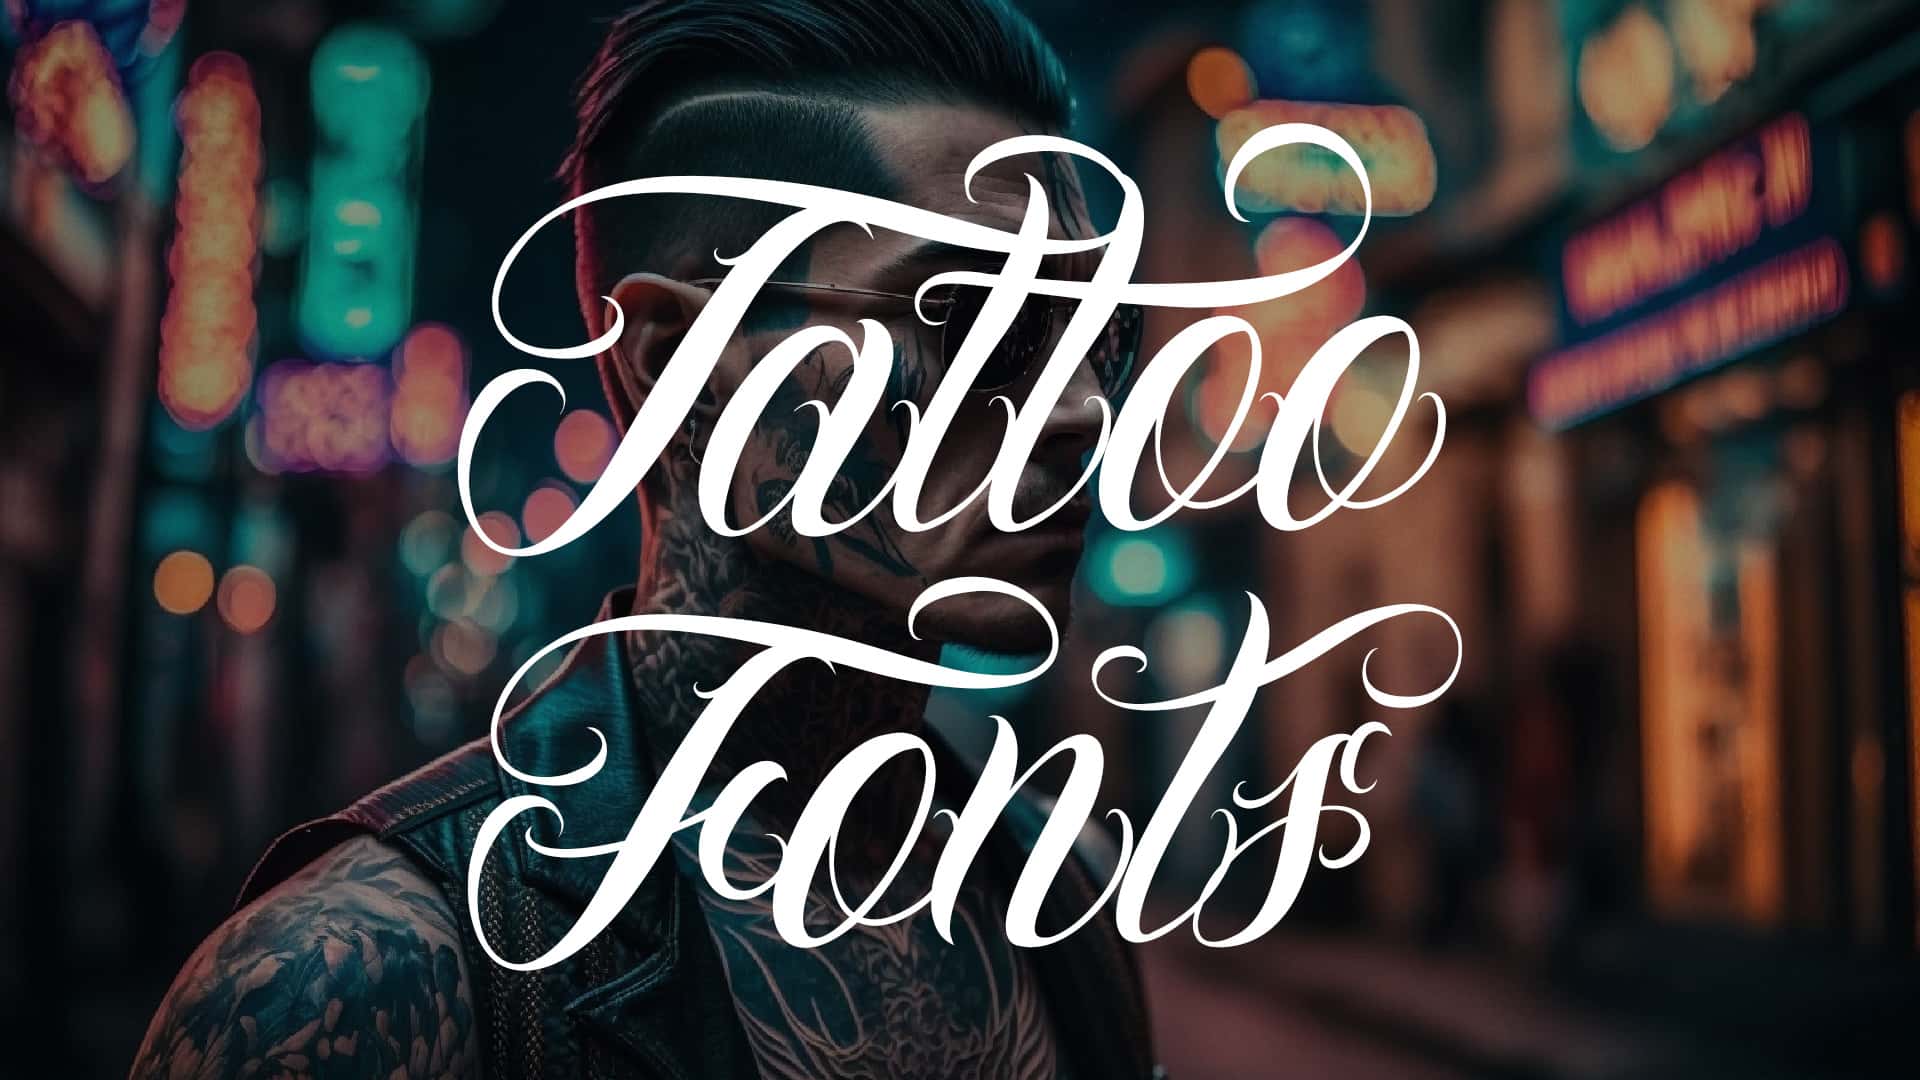 38 Tattoo Fonts To Ink Your Designs in Style | HipFonts